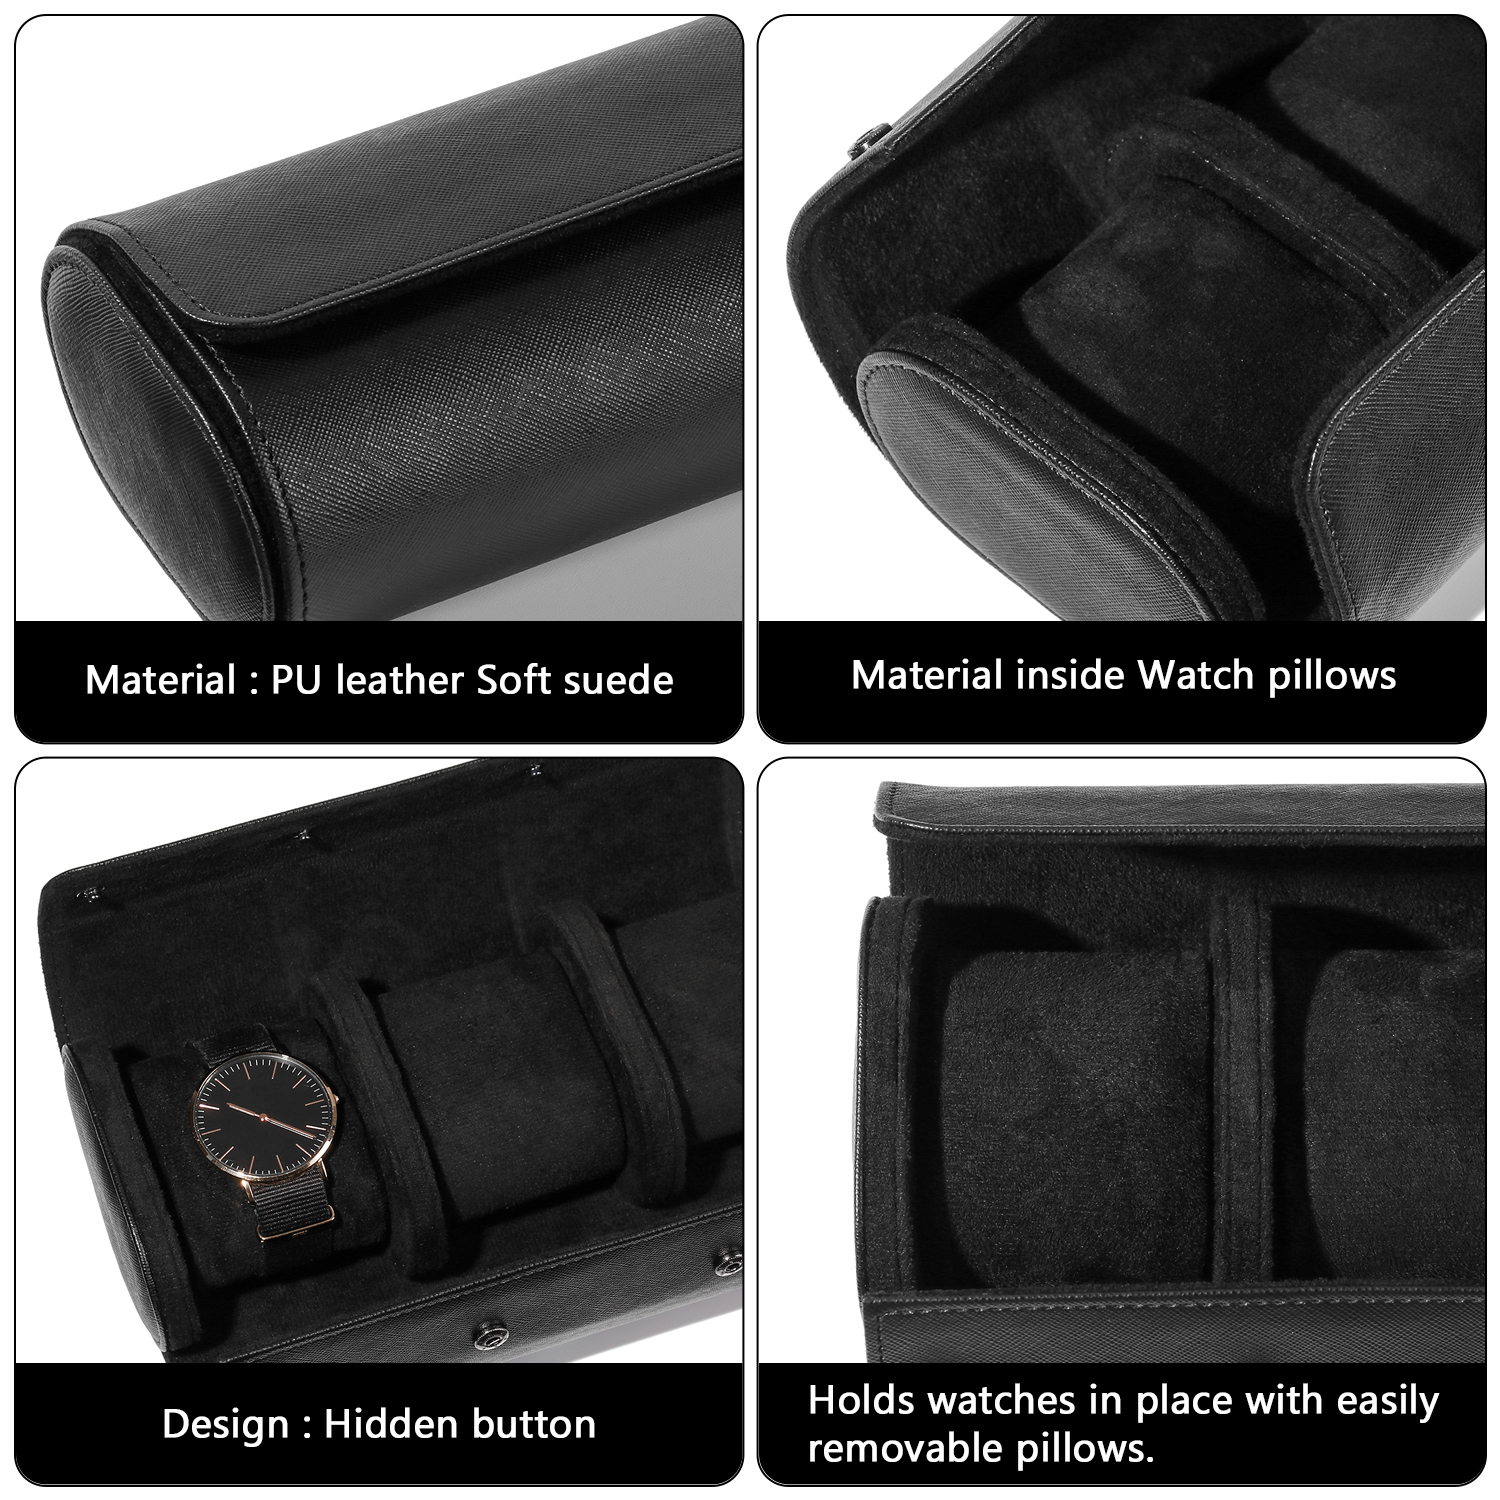 HS Men Watch Roll Travel Case Black Watch Case Organizer Portable 3 Watch Storage Watch Roll Gifts Removable Pillows Display PU Leather/Multicolor